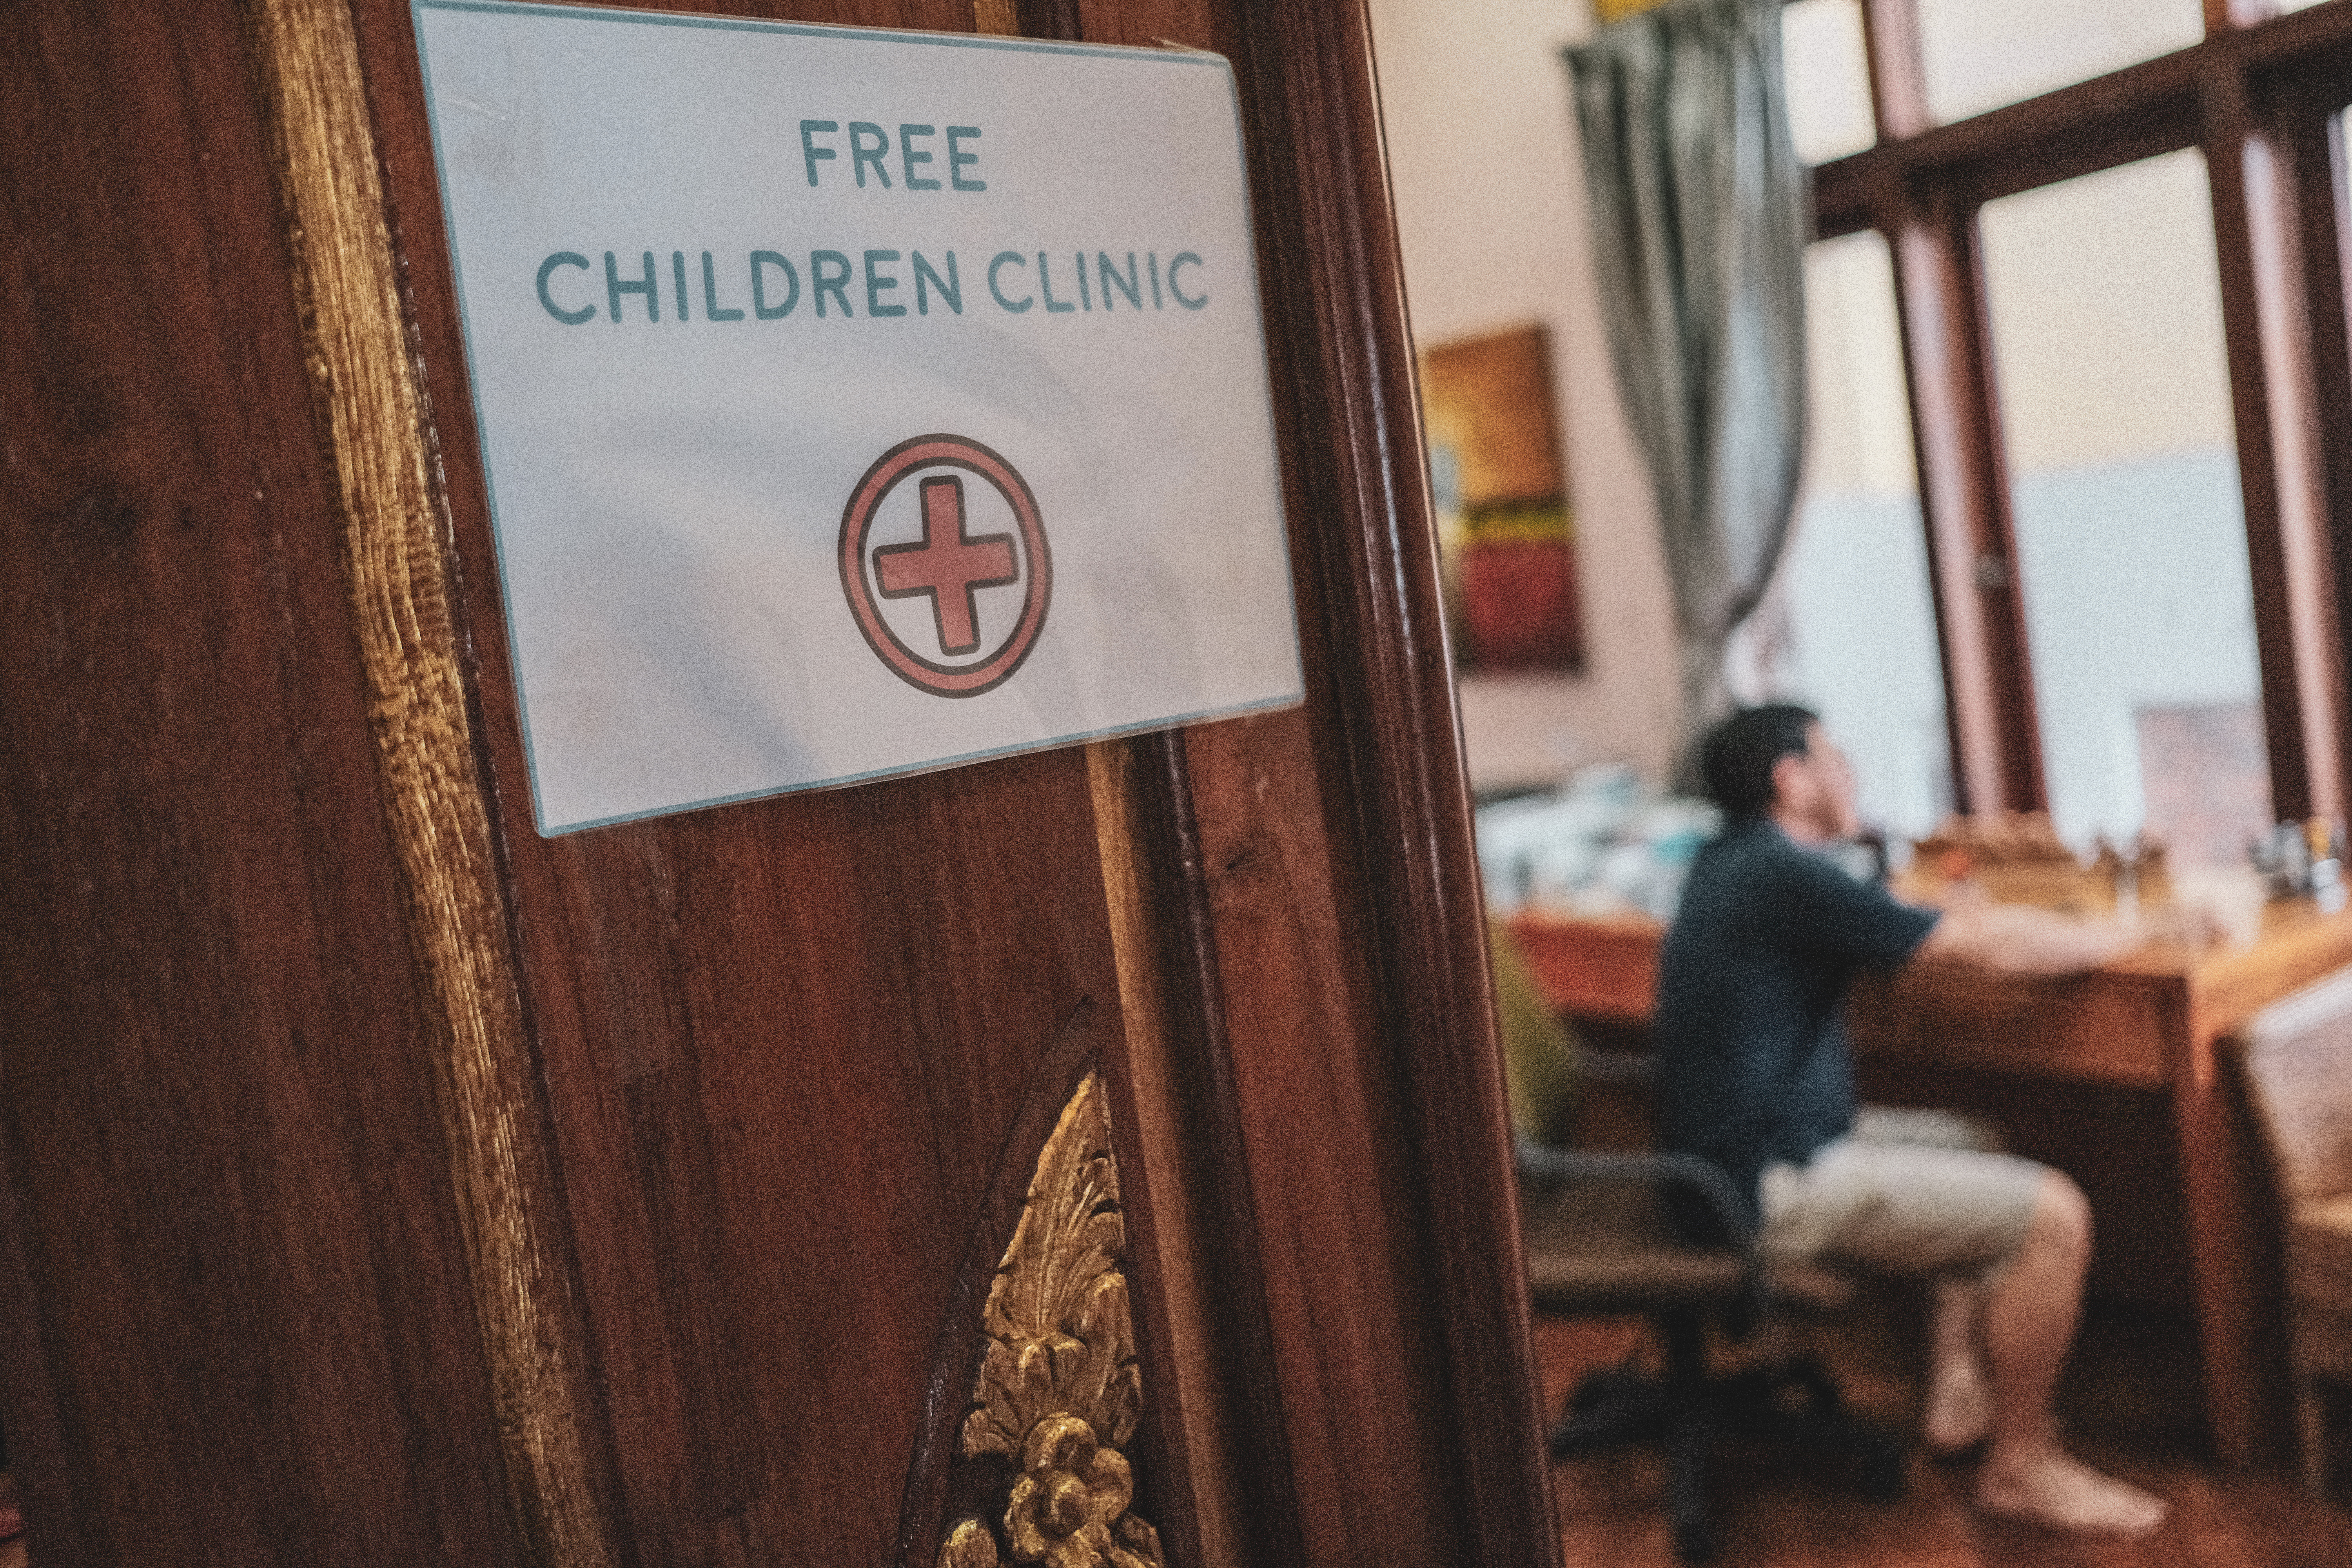 Dr Chew runs a free clinic for children from less fortunate families in the community. Guests will also be relieved there’s a doctor in the house, in case of an emergency.